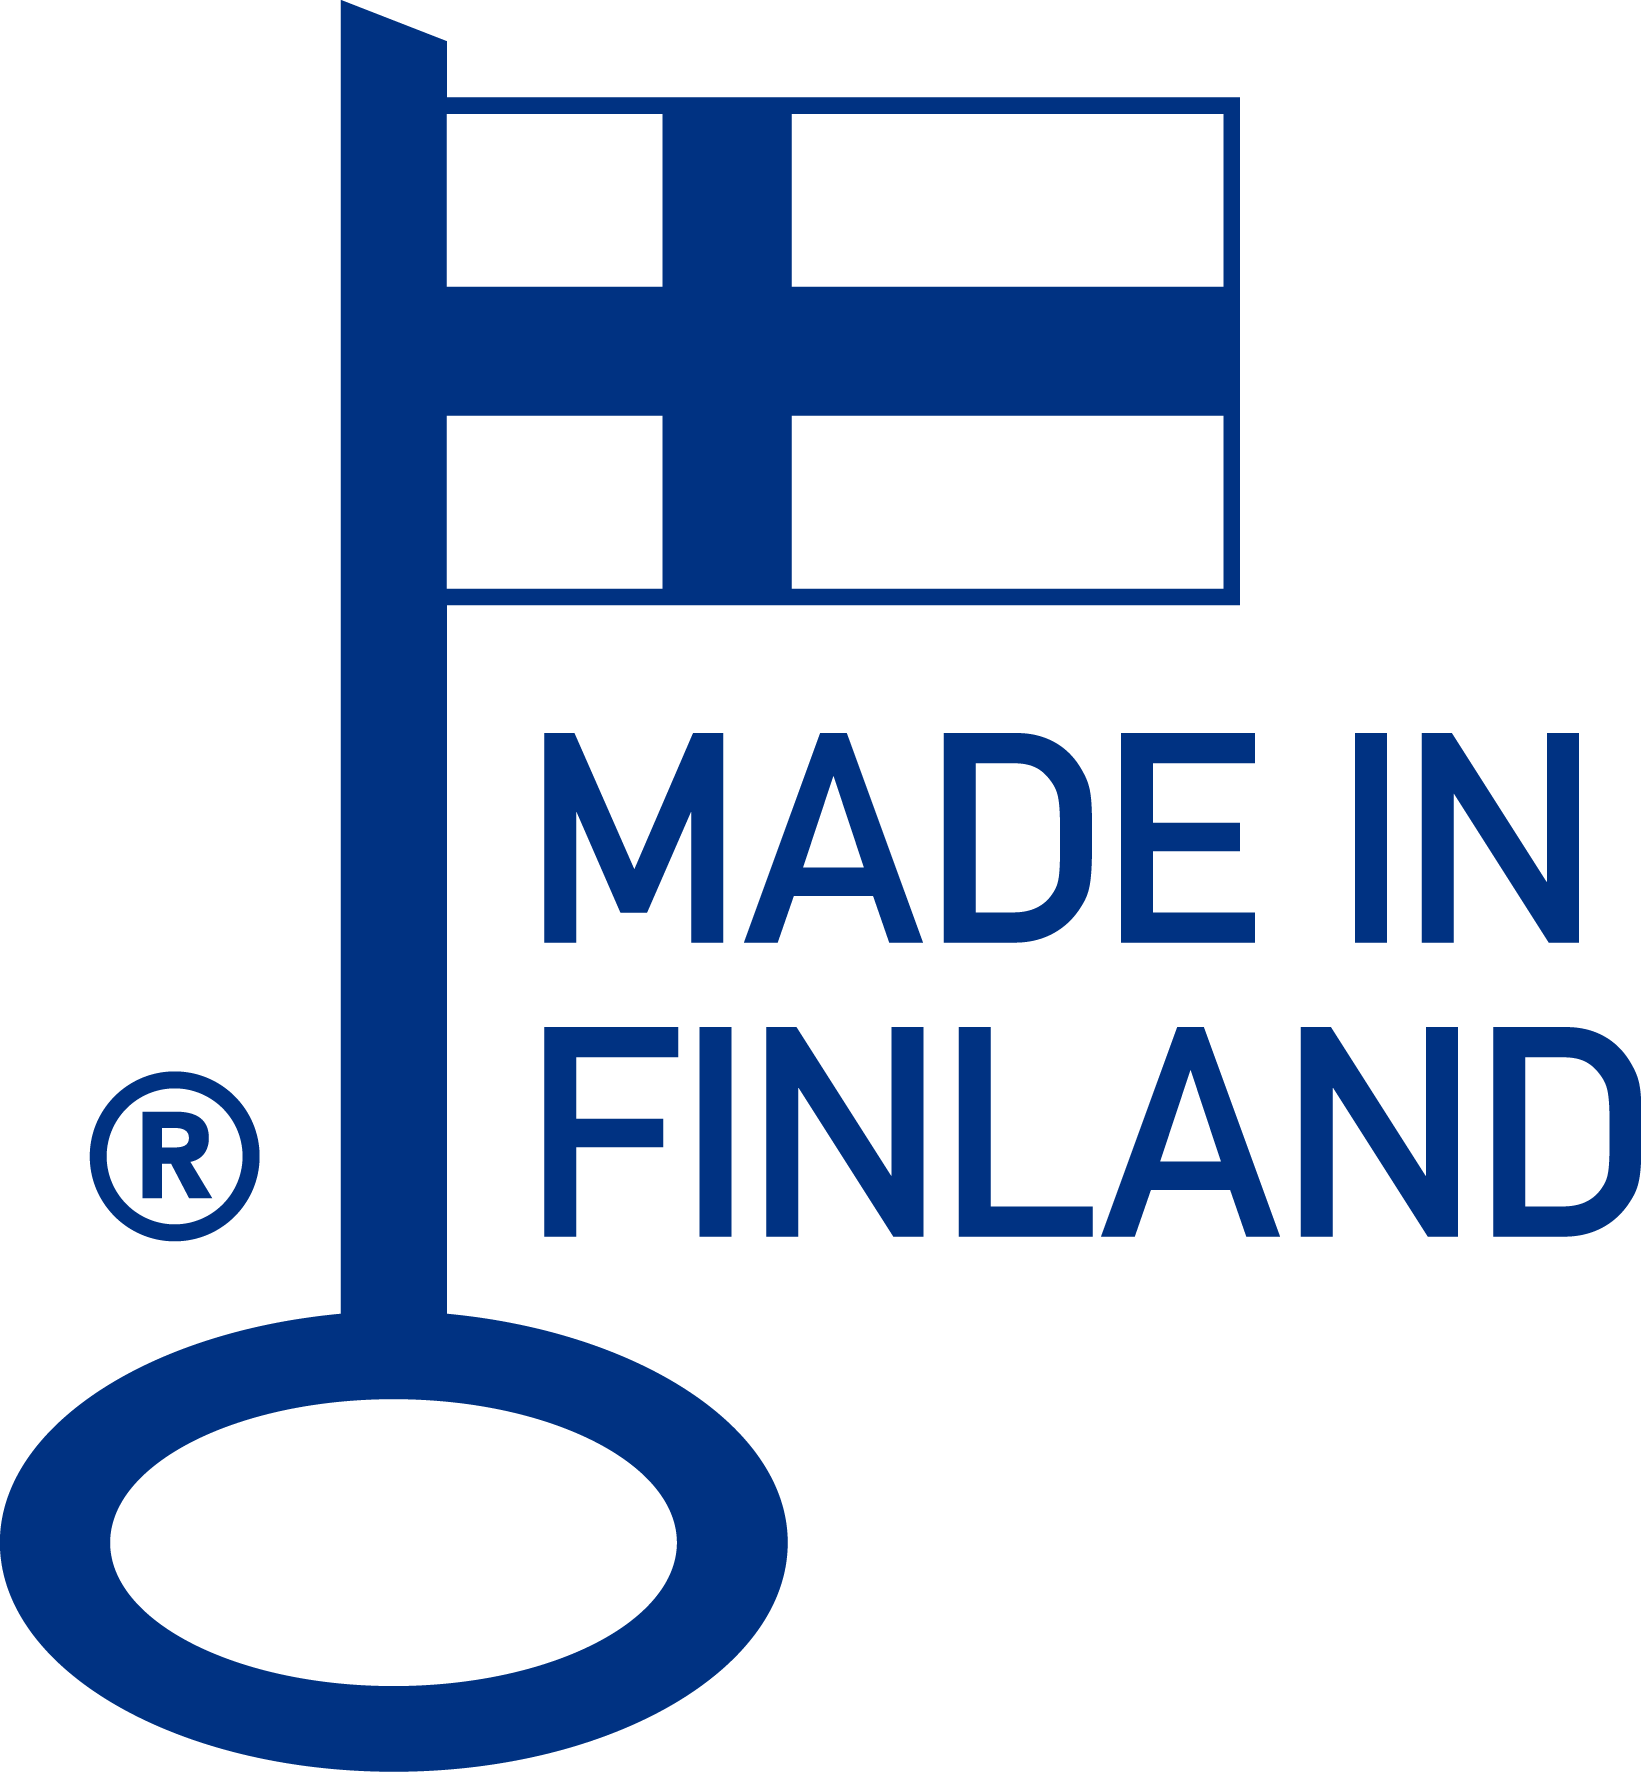 Sako - Proudly designed and manufactured in Finland